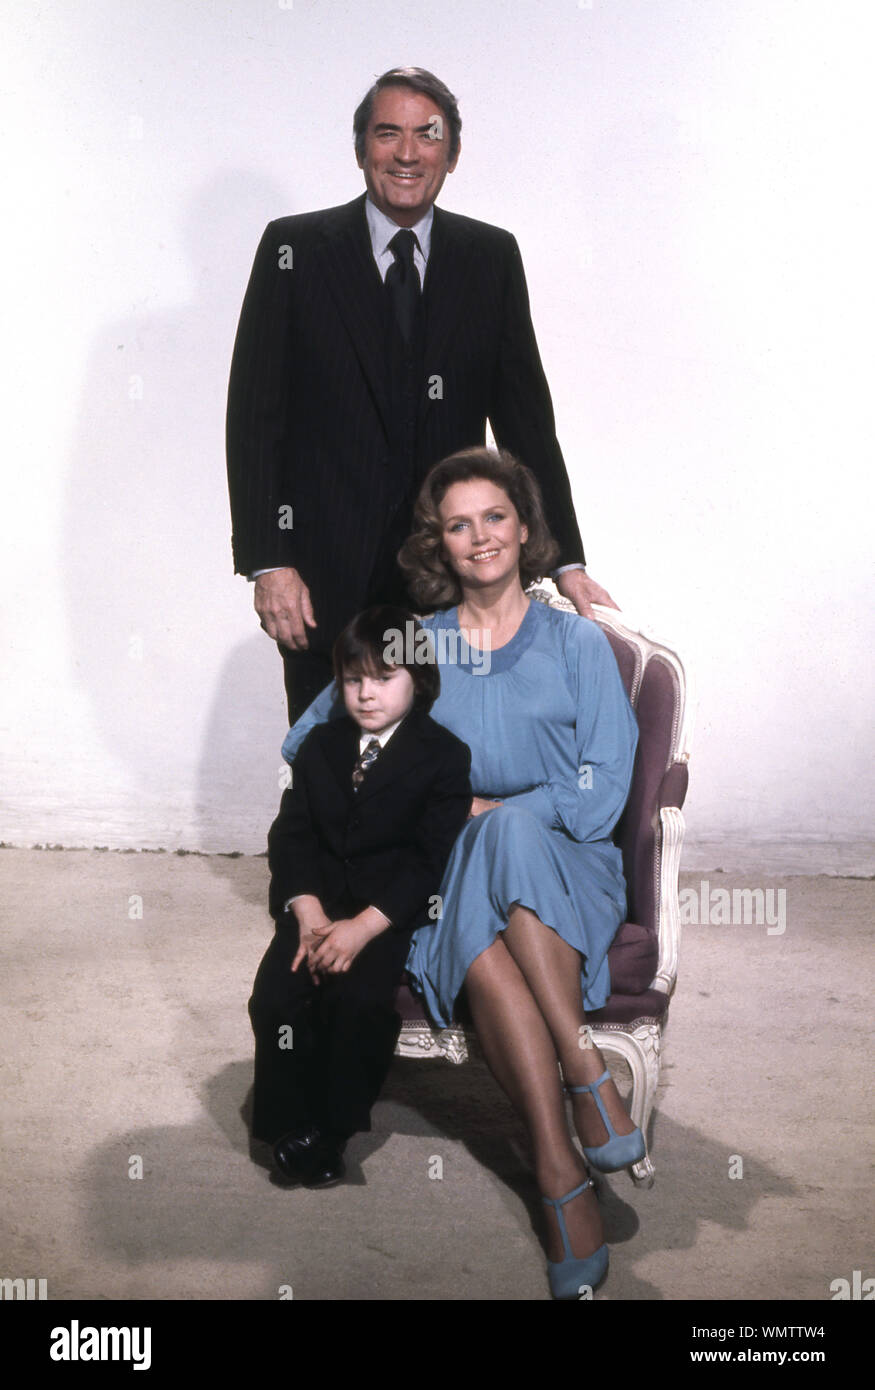 Gregory Peck, Lee Remick, Harvey Stephens, 'The Omen'  (1976) 20th Century Fox   File Reference # 33848-618THA Stock Photo